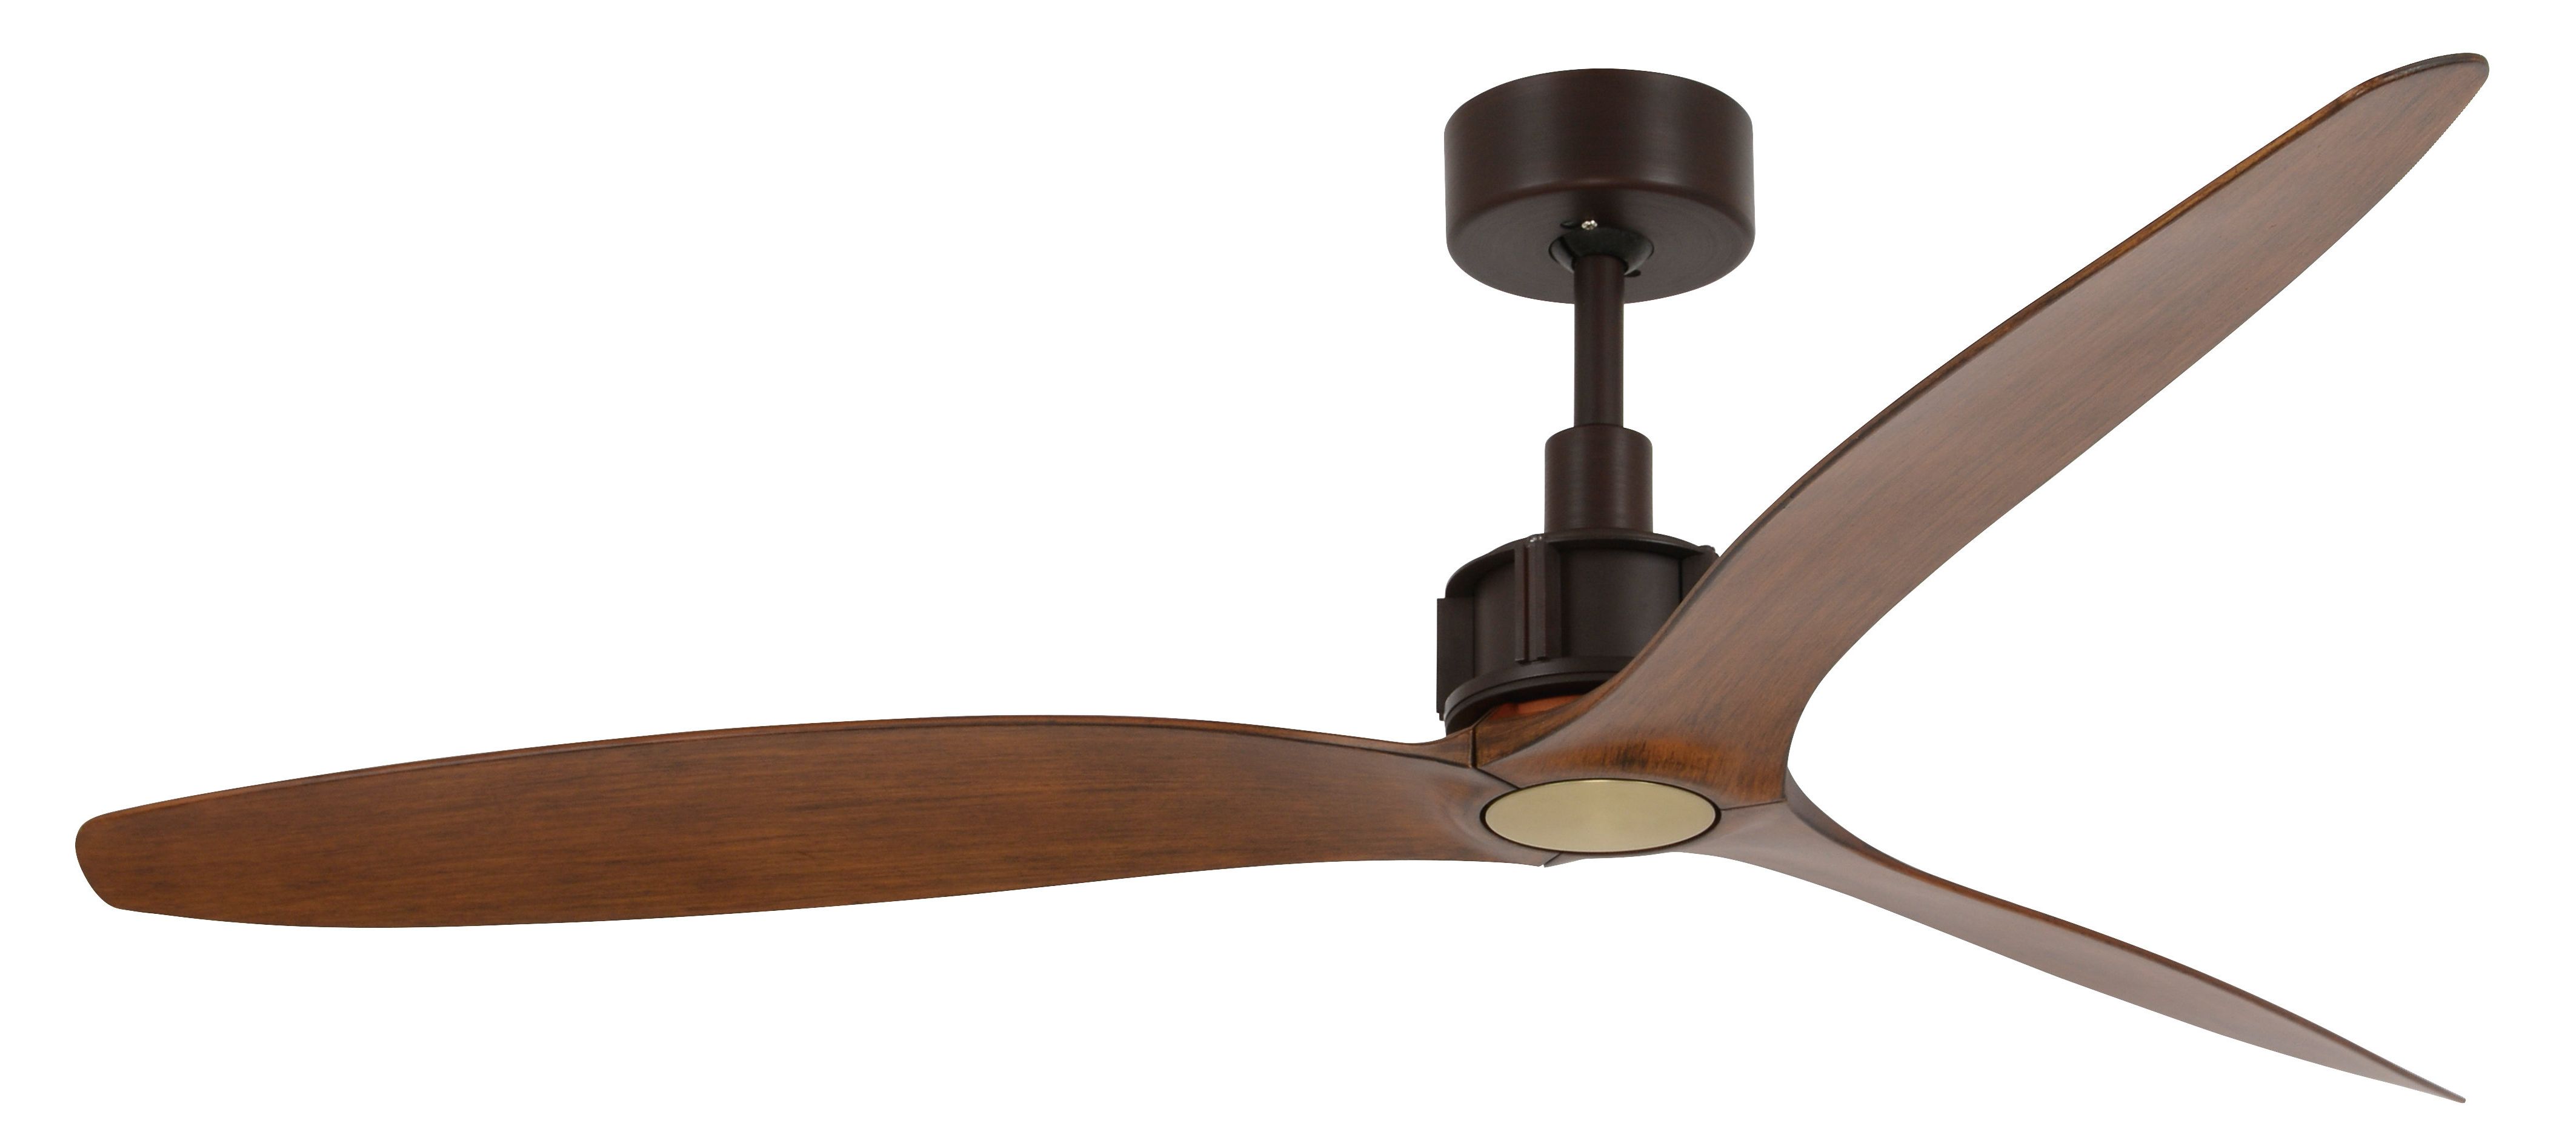 Modern Rustic Interiors Theron 52" Catoe 3 Blade Ceiling Fan With Remote Regarding Recent Dennis 3 Blade Ceiling Fans (View 20 of 20)